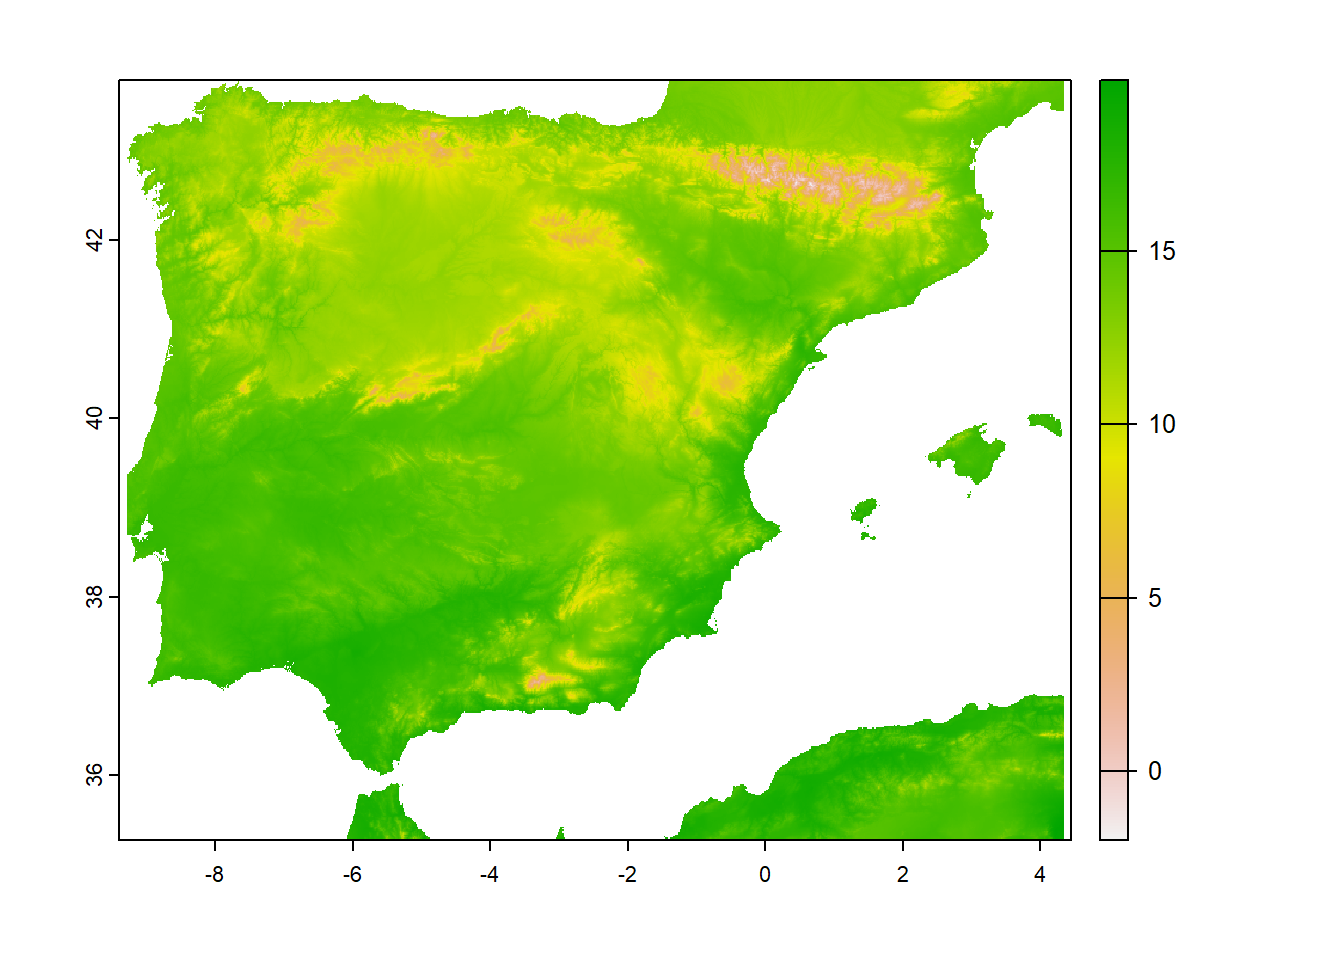 Cropped raster representing the average annual temperature in Spain.